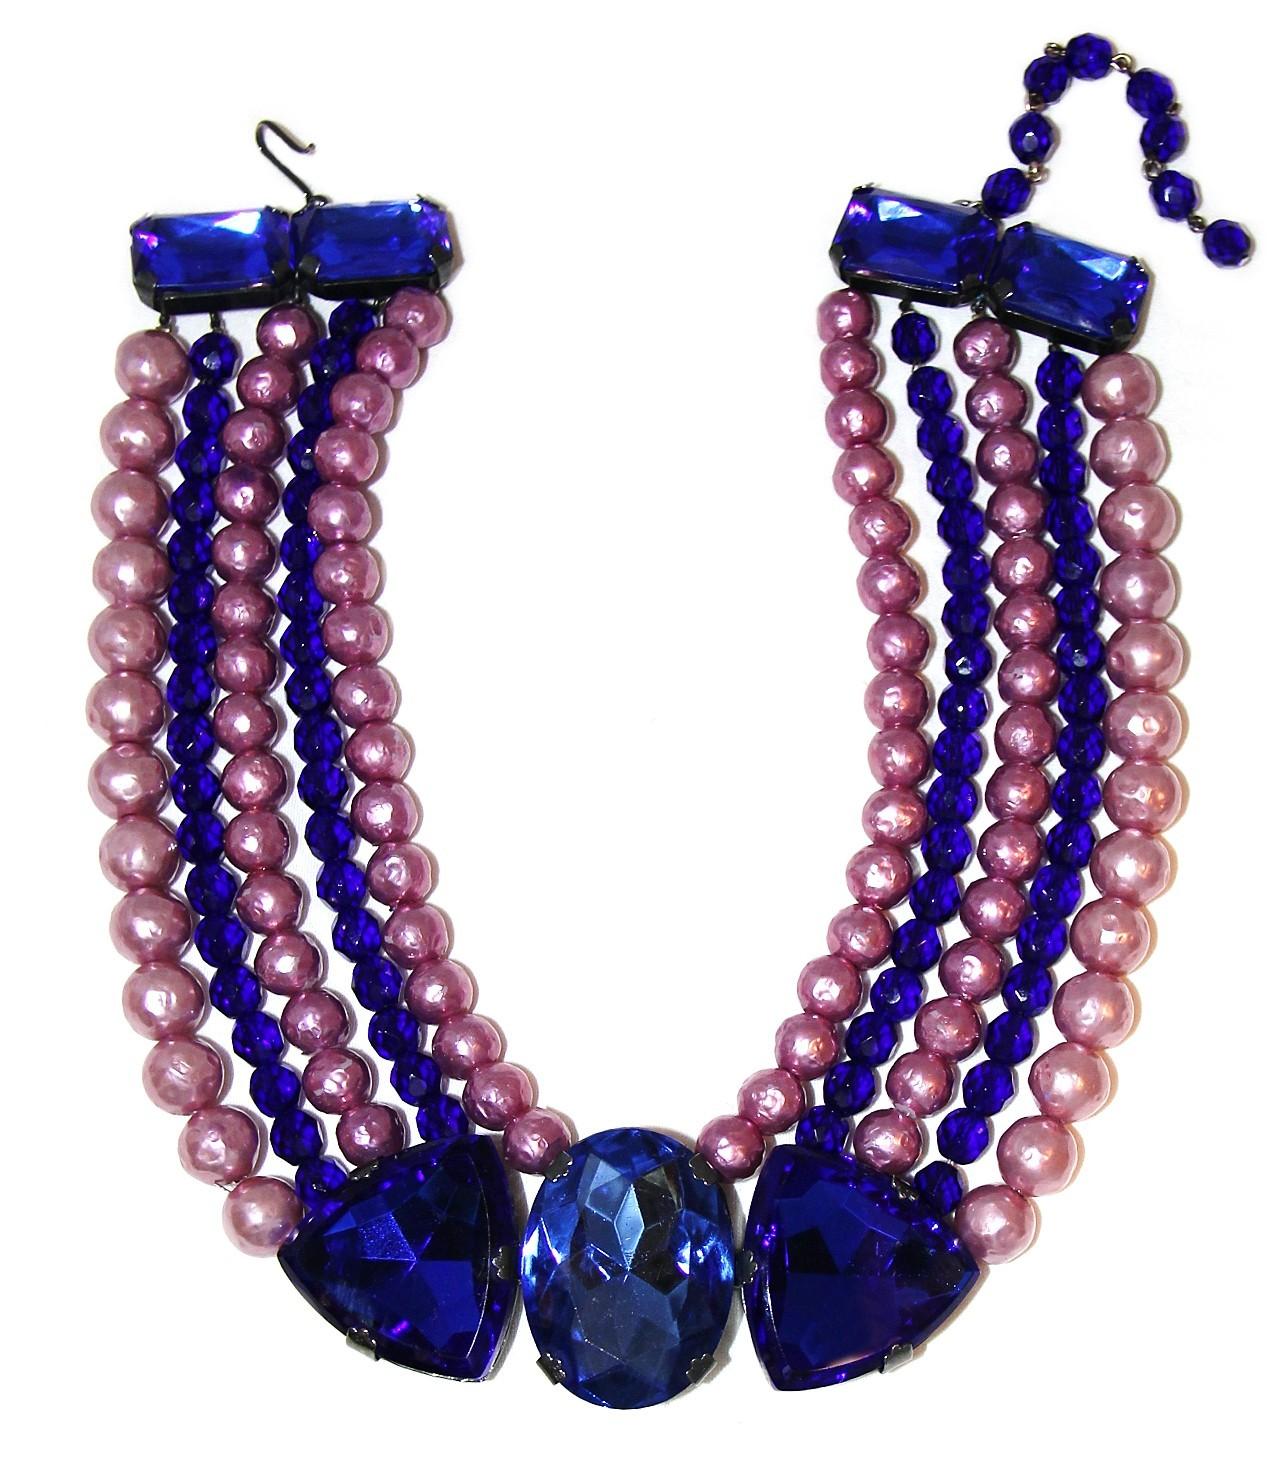 Circa 1970s Yves Saint Laurent Rive Gauche multi-strand necklace with faceted cobalt blue beads and textured faux-pearls in pink and mauve, with a center piece of a large prong set faceted glass in two shades of blue. The strands are gathered at the